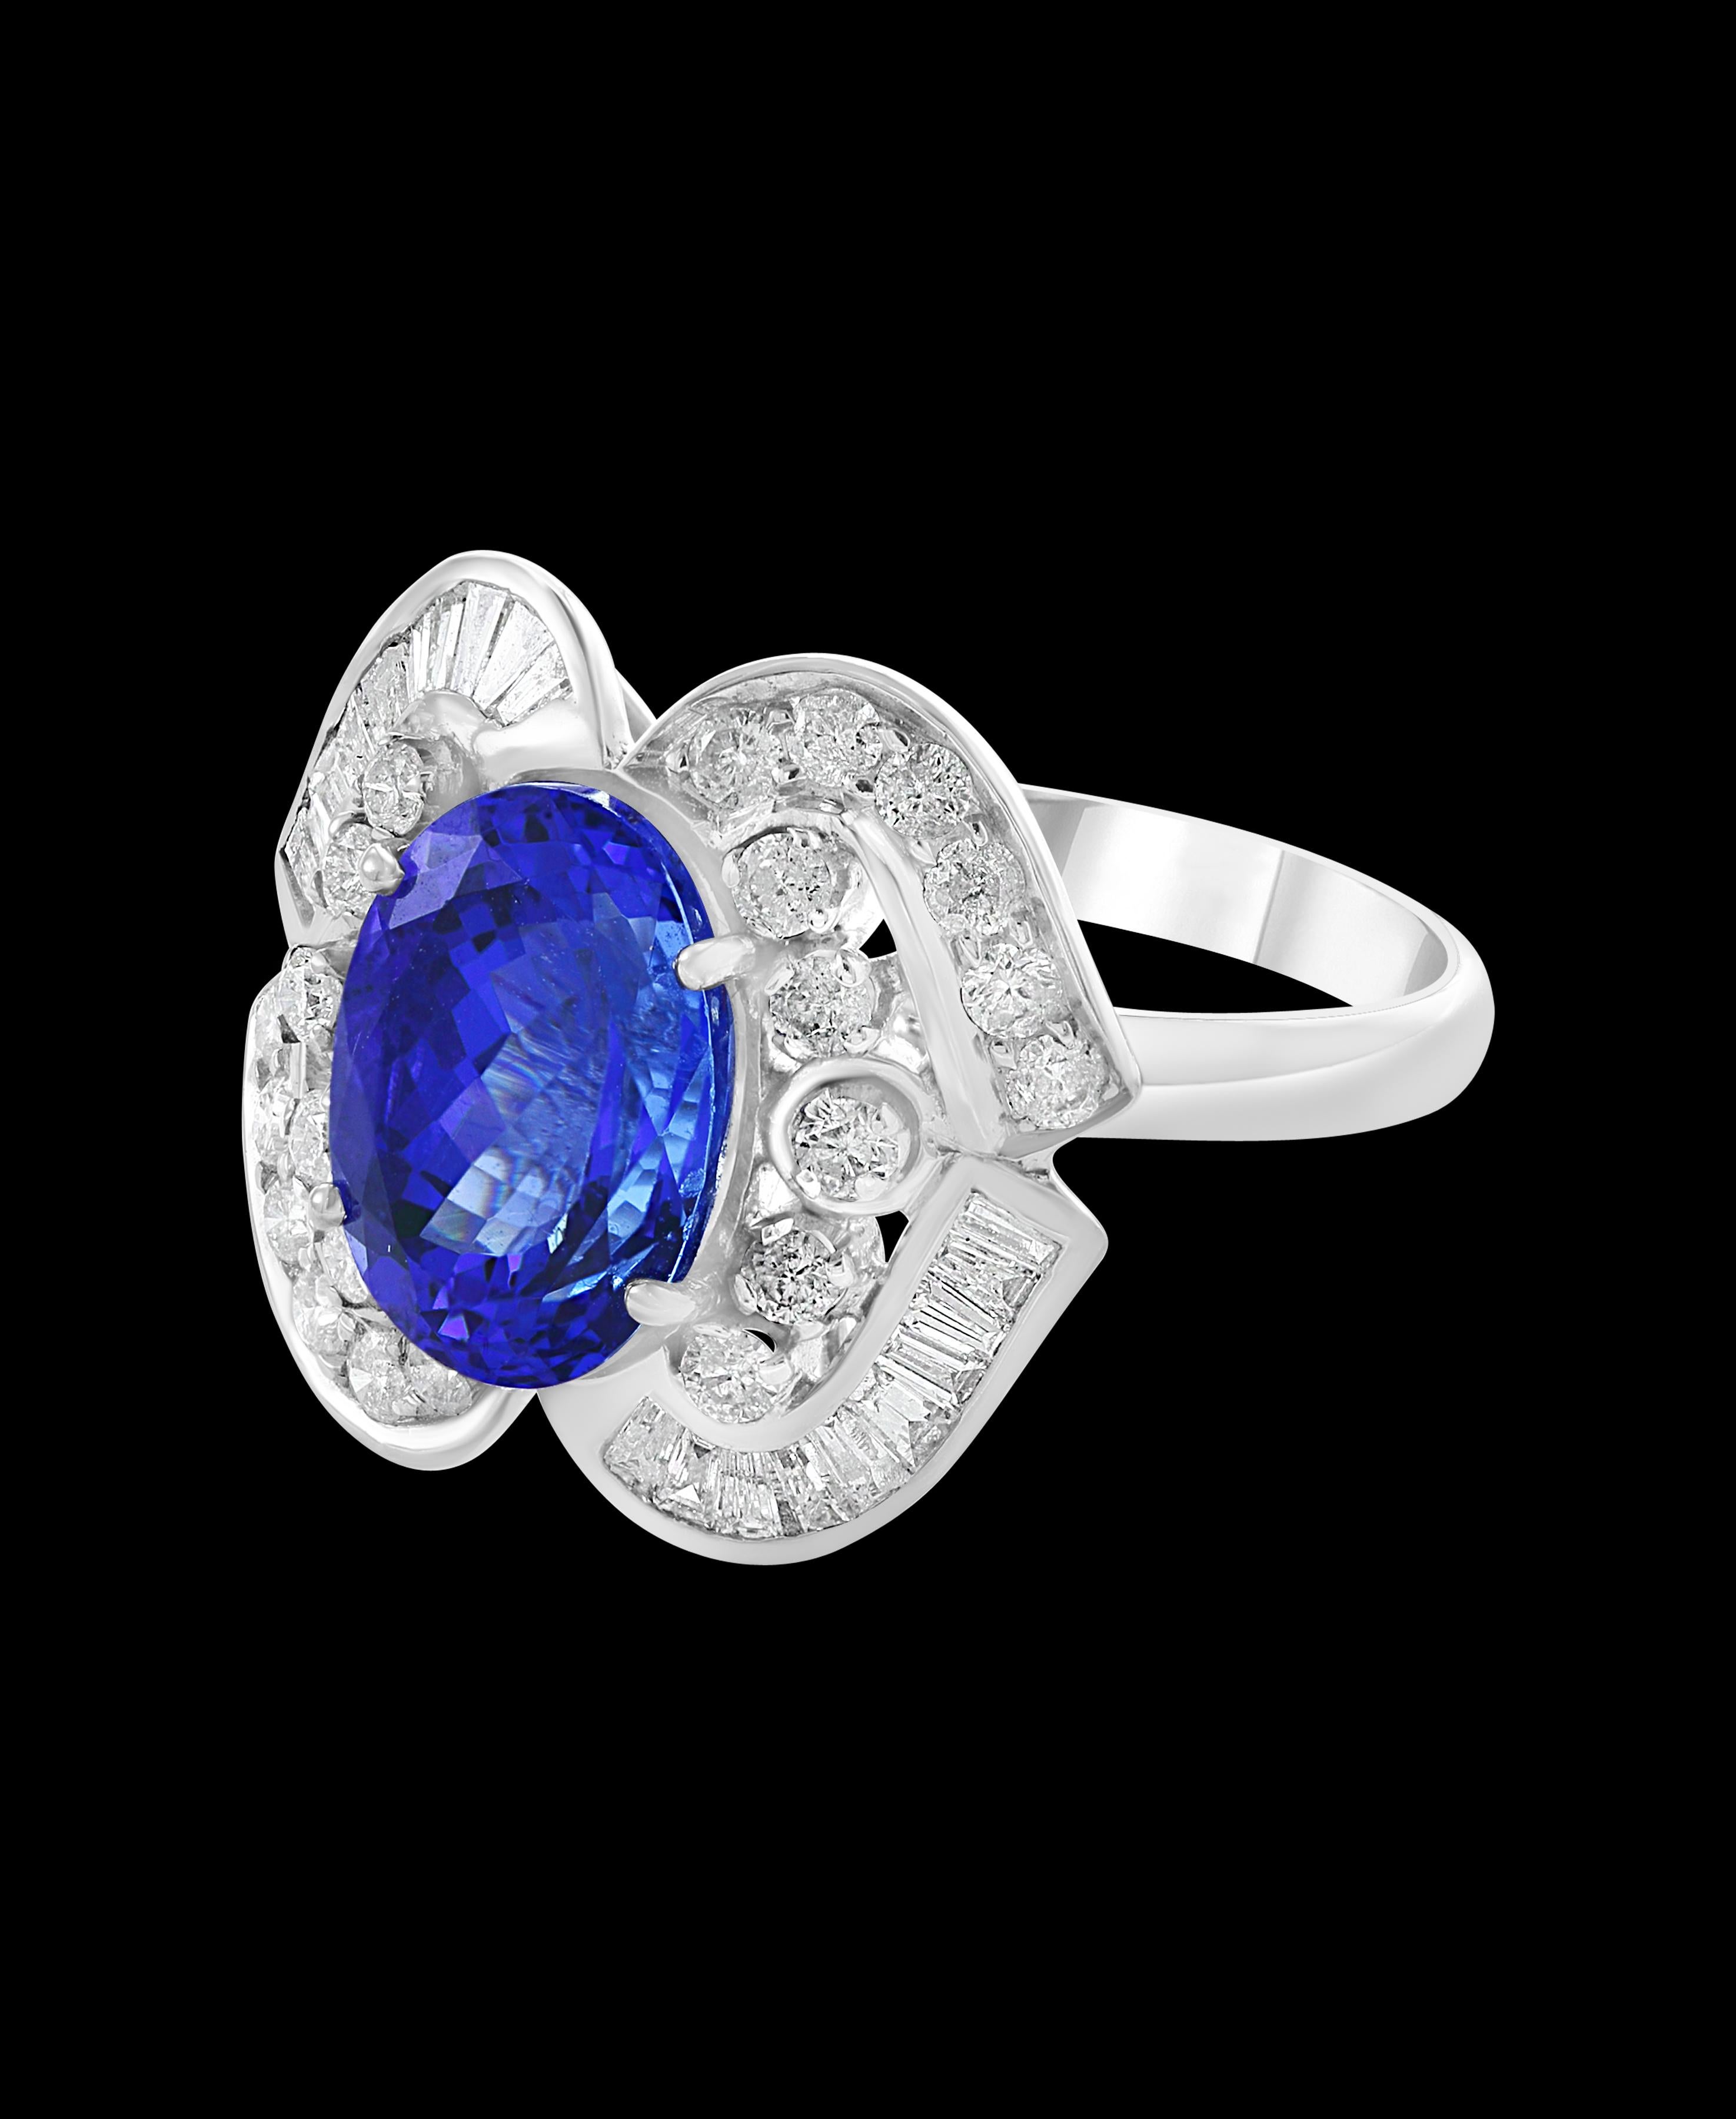 This extraordinary, 5.38 carat tanzanite is truly an extraordinary gemstone. There are  total  of 1.35 carats of shimmering white diamonds, this brilliant Oval-cut gem exhibits the rich violetish-blue color for which these stones are known and so